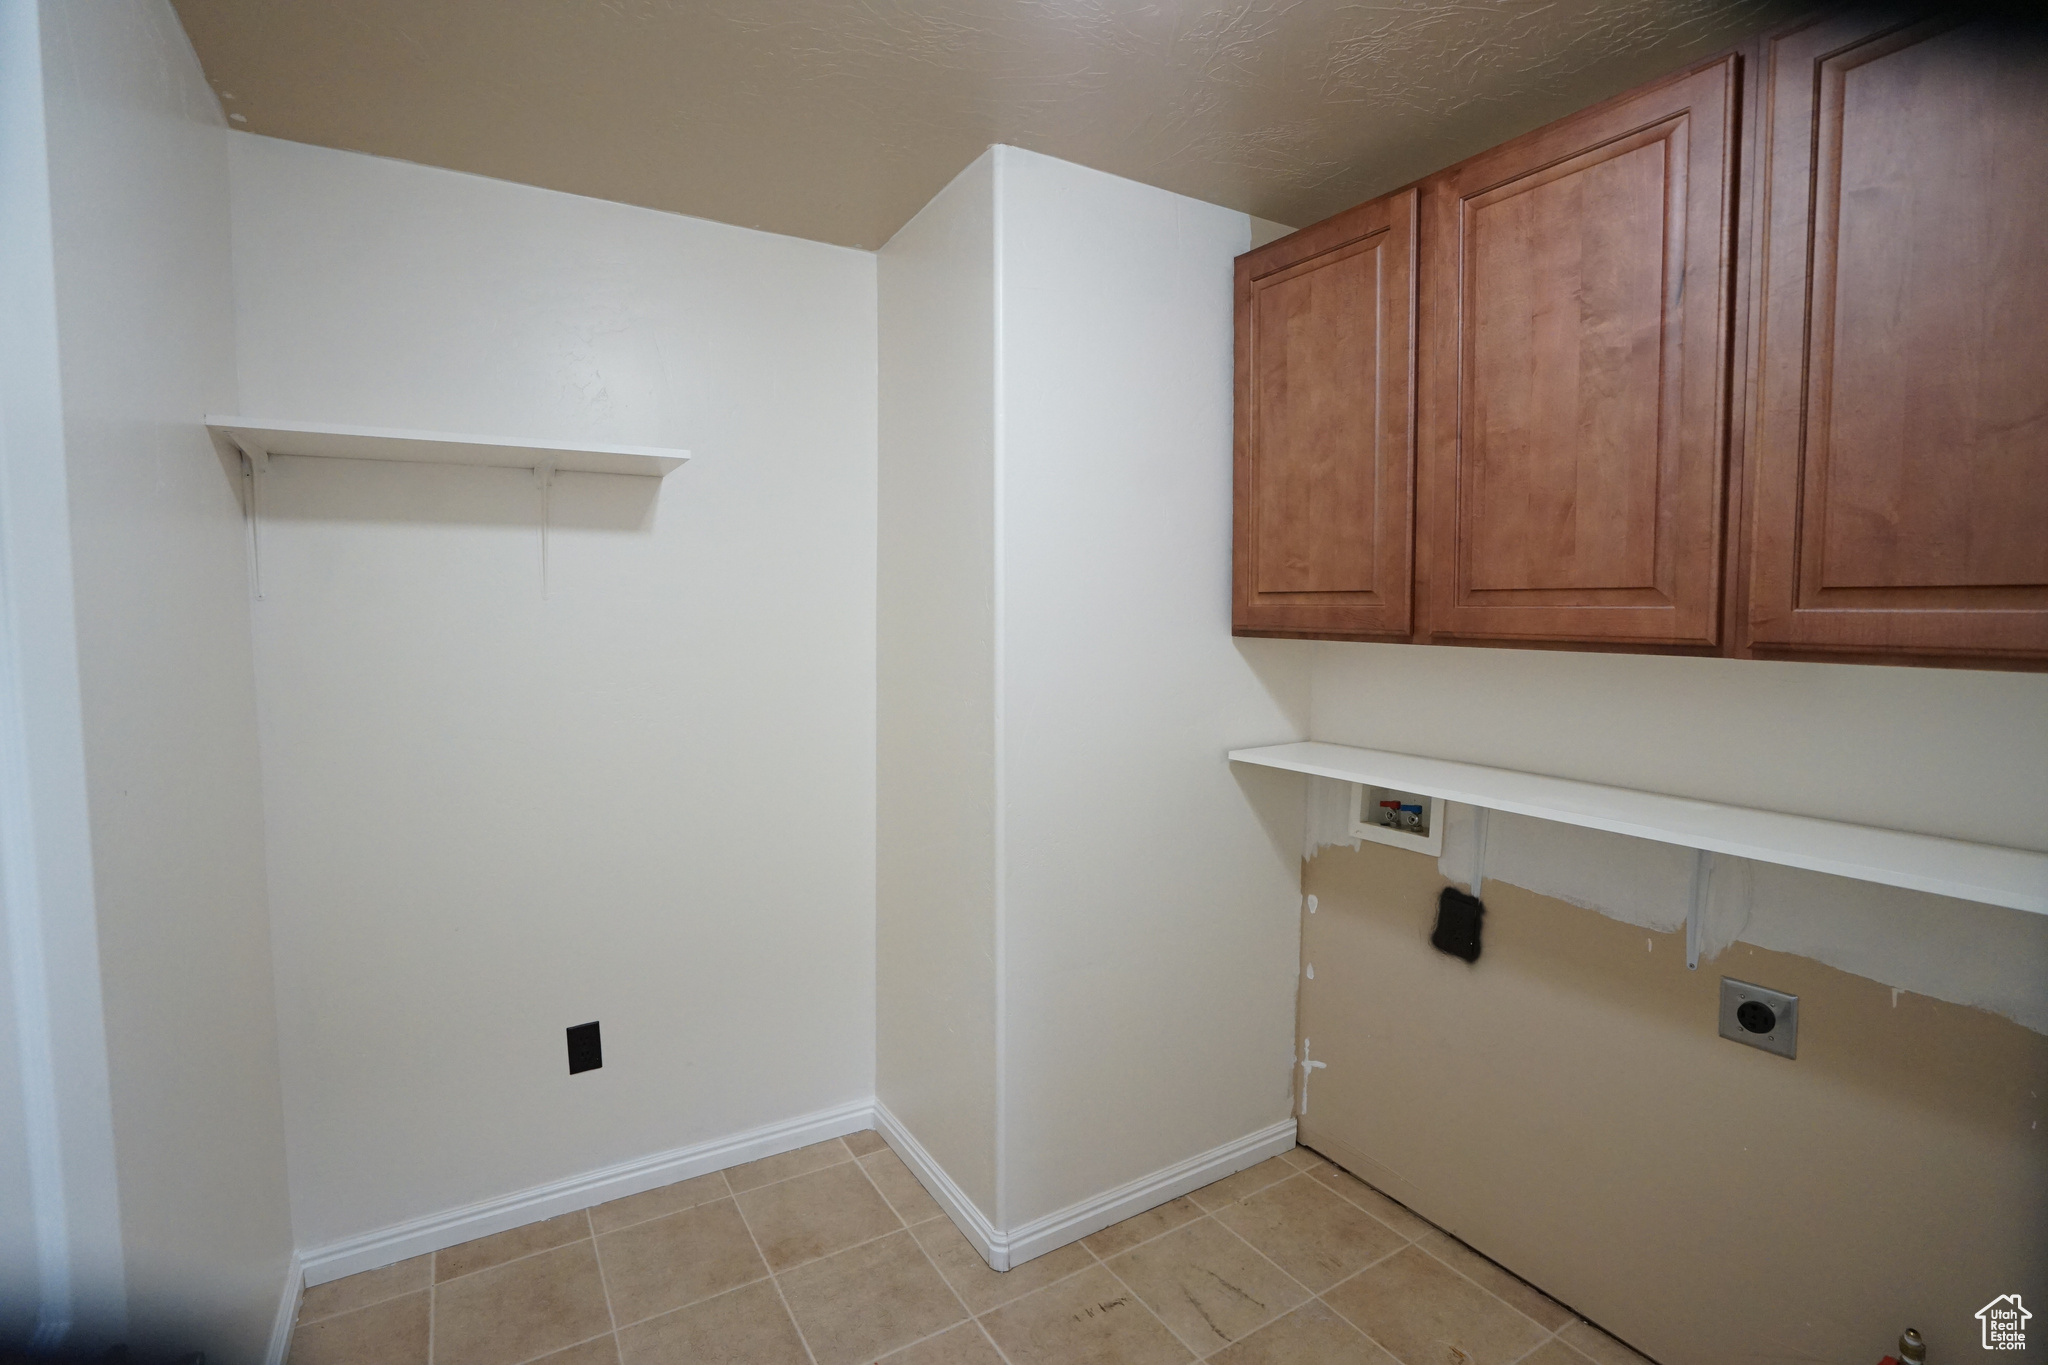 Laundry room with hookup for an electric dryer, cabinets, and light tile flooring